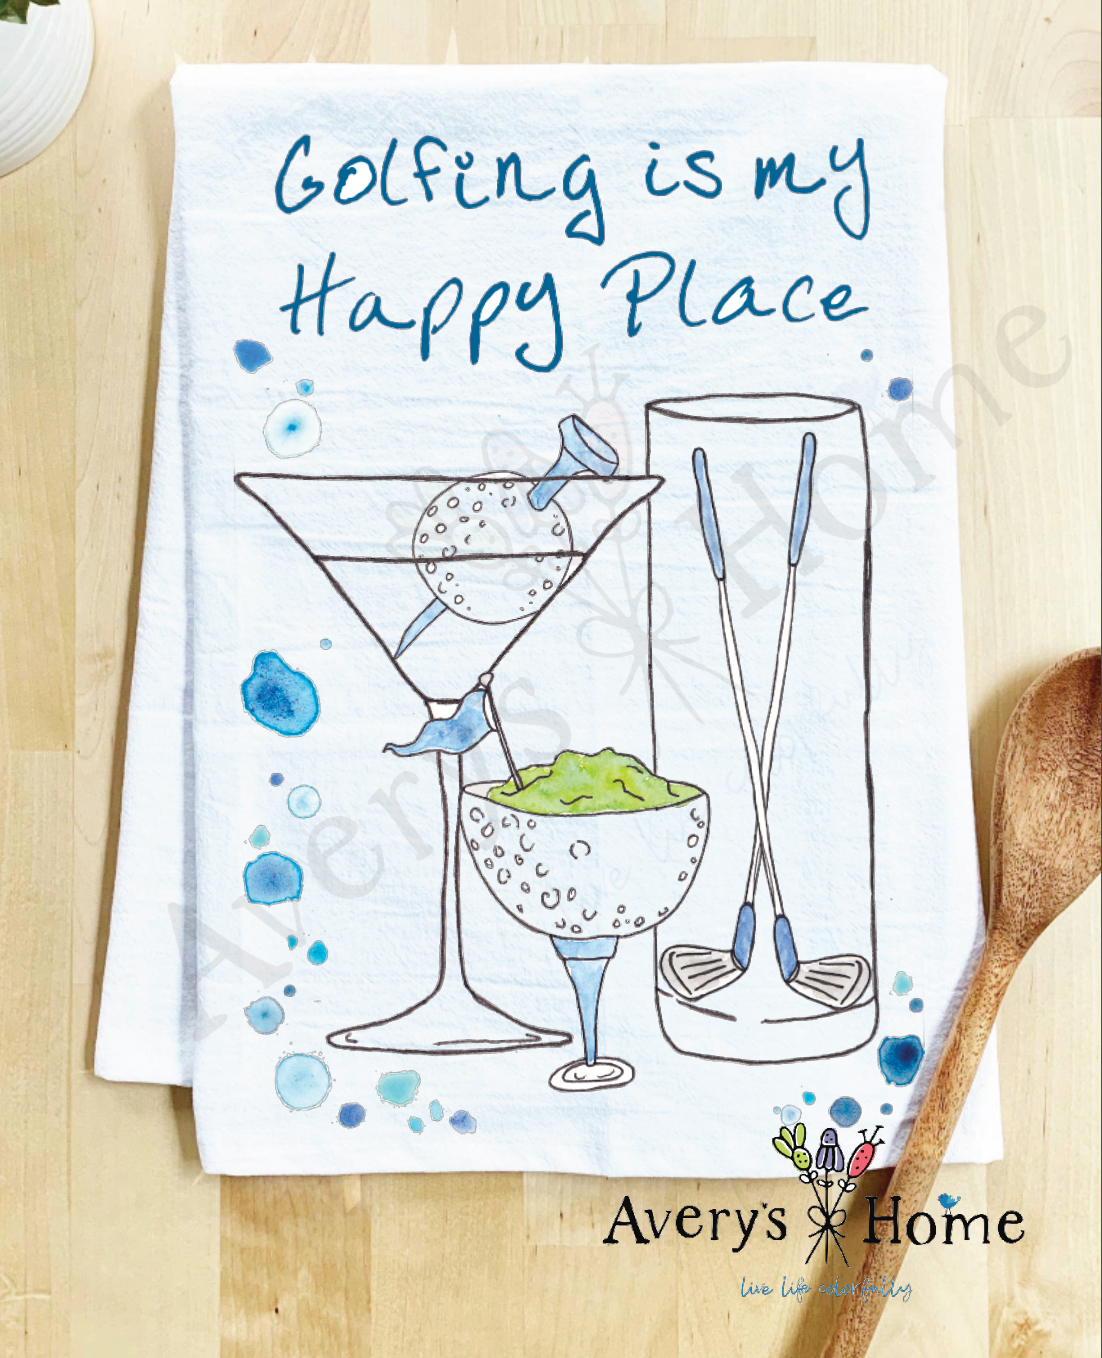 Avery's Home - Golfing Happy Place Cocktails Customizable Kitchen Towel: Standard